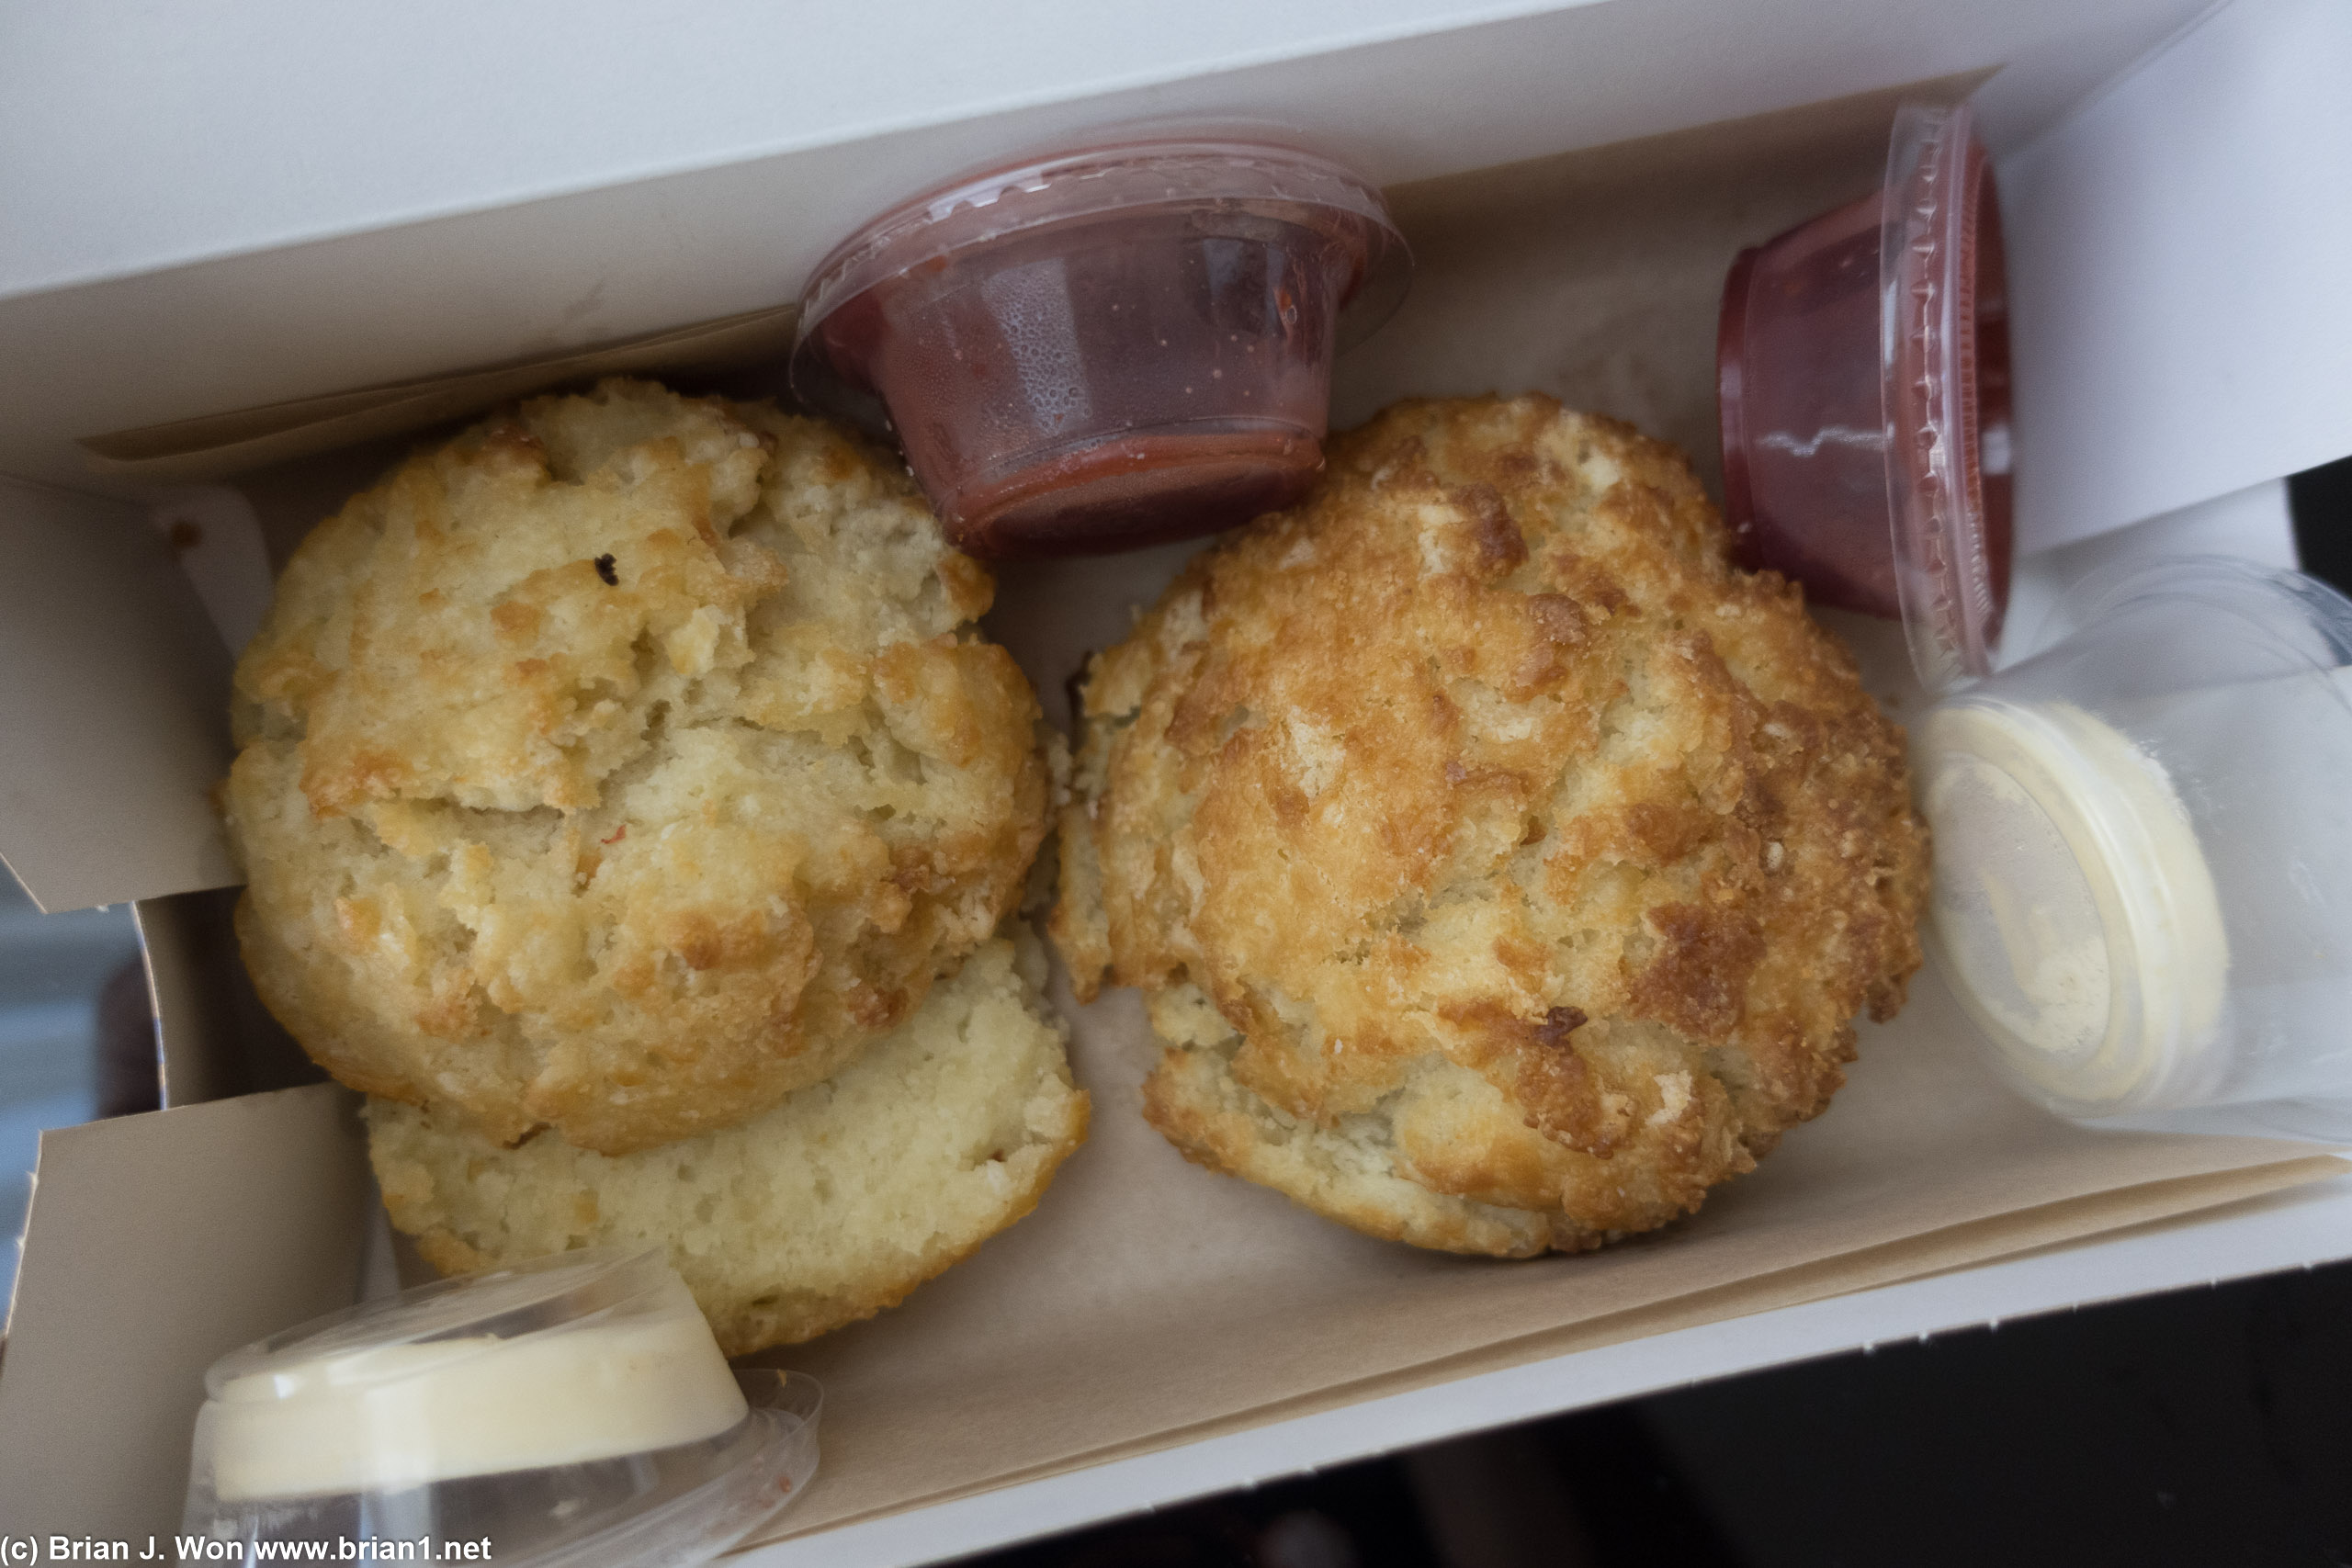 Biscuits from District Donuts were very disappointing.